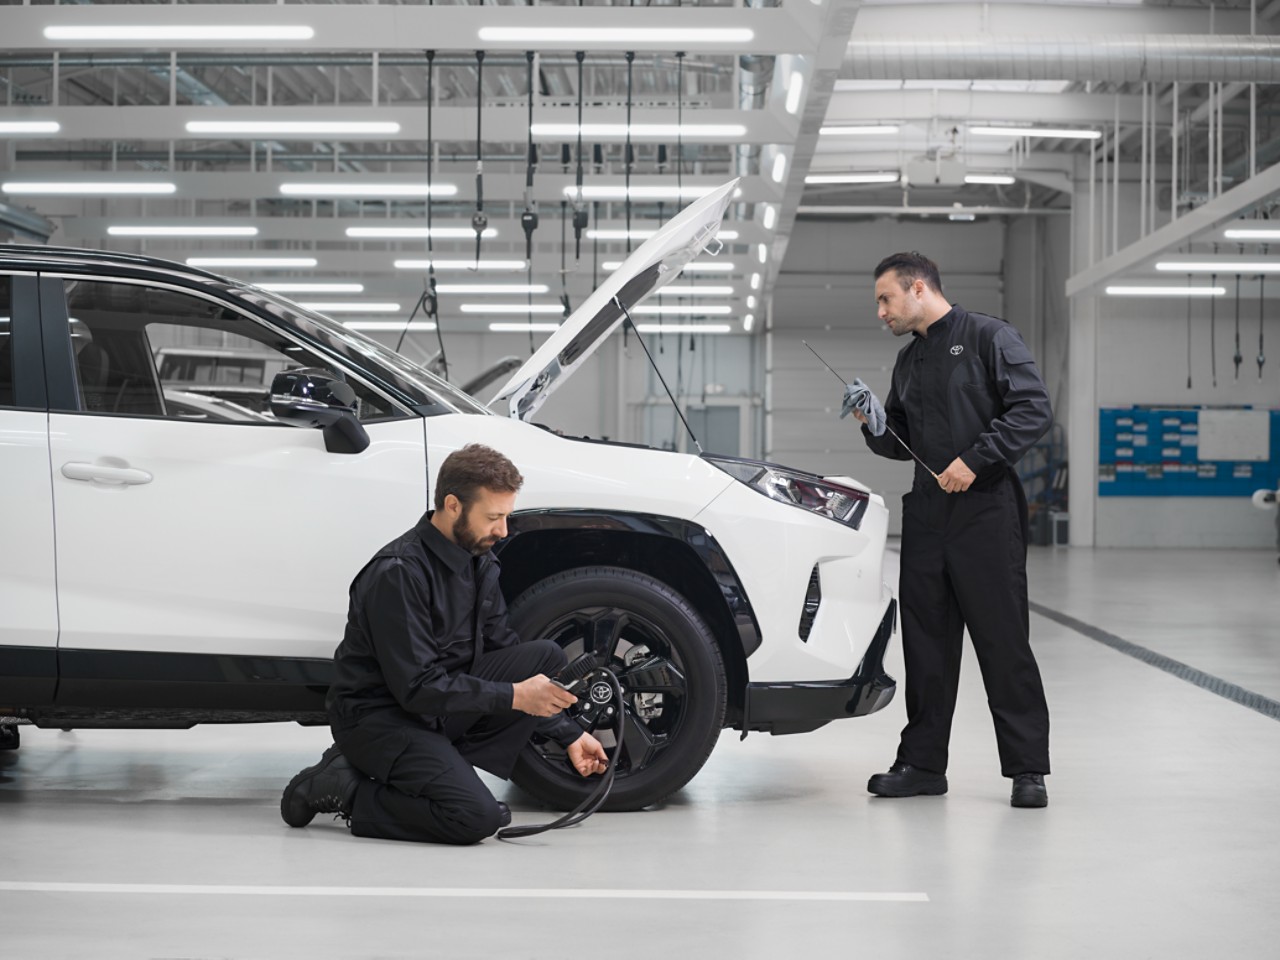 Two technicians service a white Toyota RAV4, its bonnet is up. One kneels down inspecting tyre pressure, the other oil level.